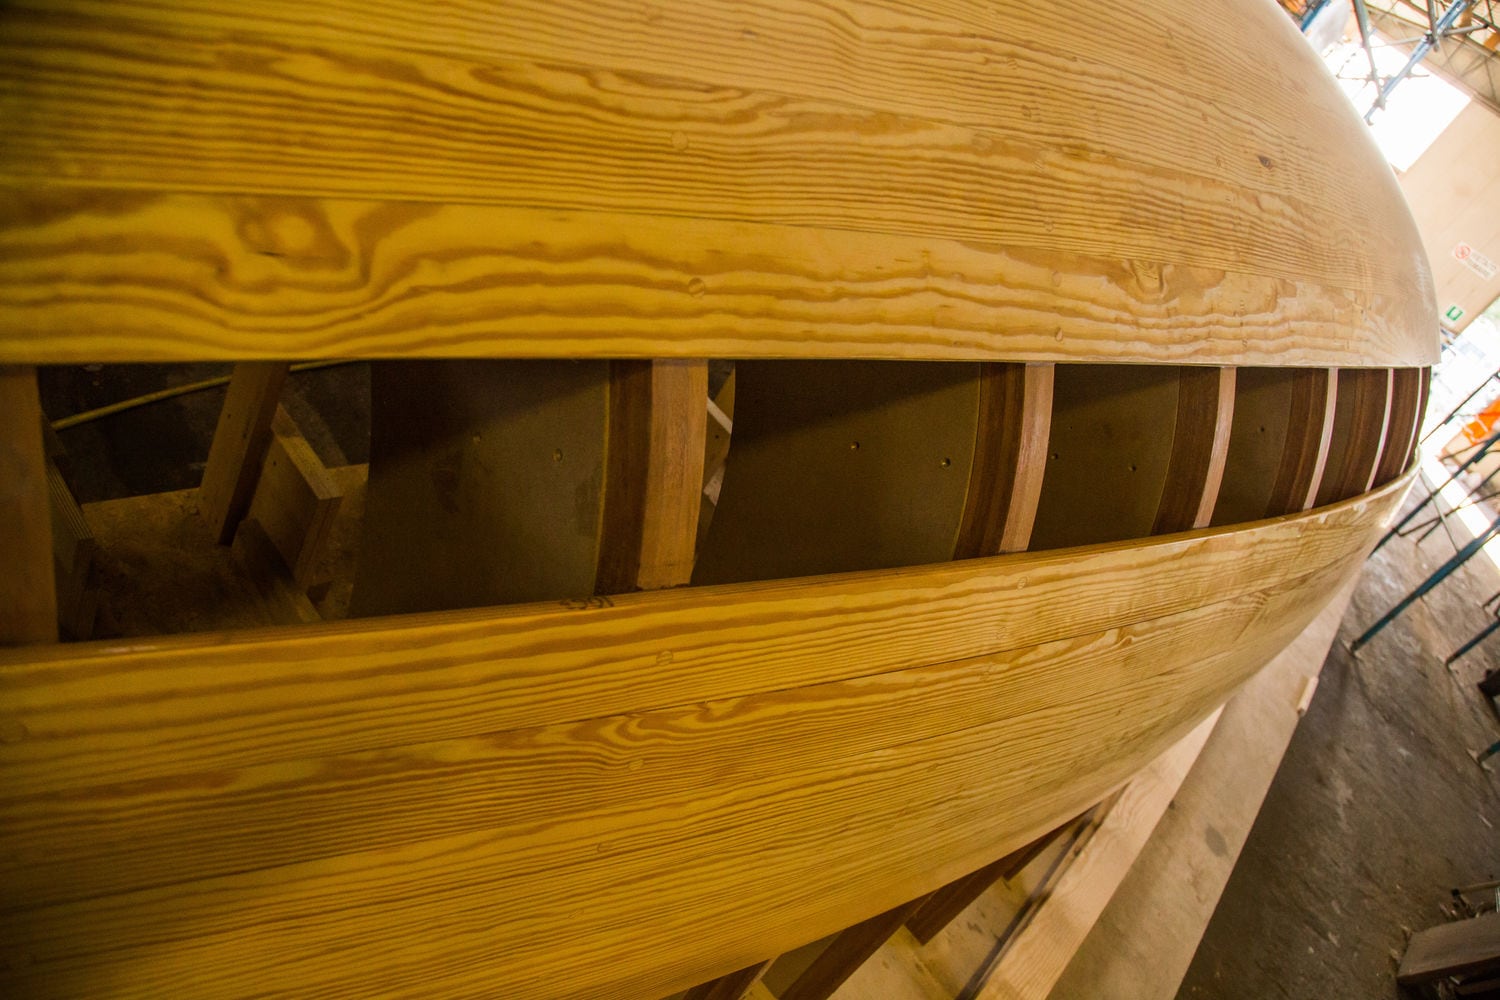 "Strip Planking Rastremato": new perspectives for the wood boat building